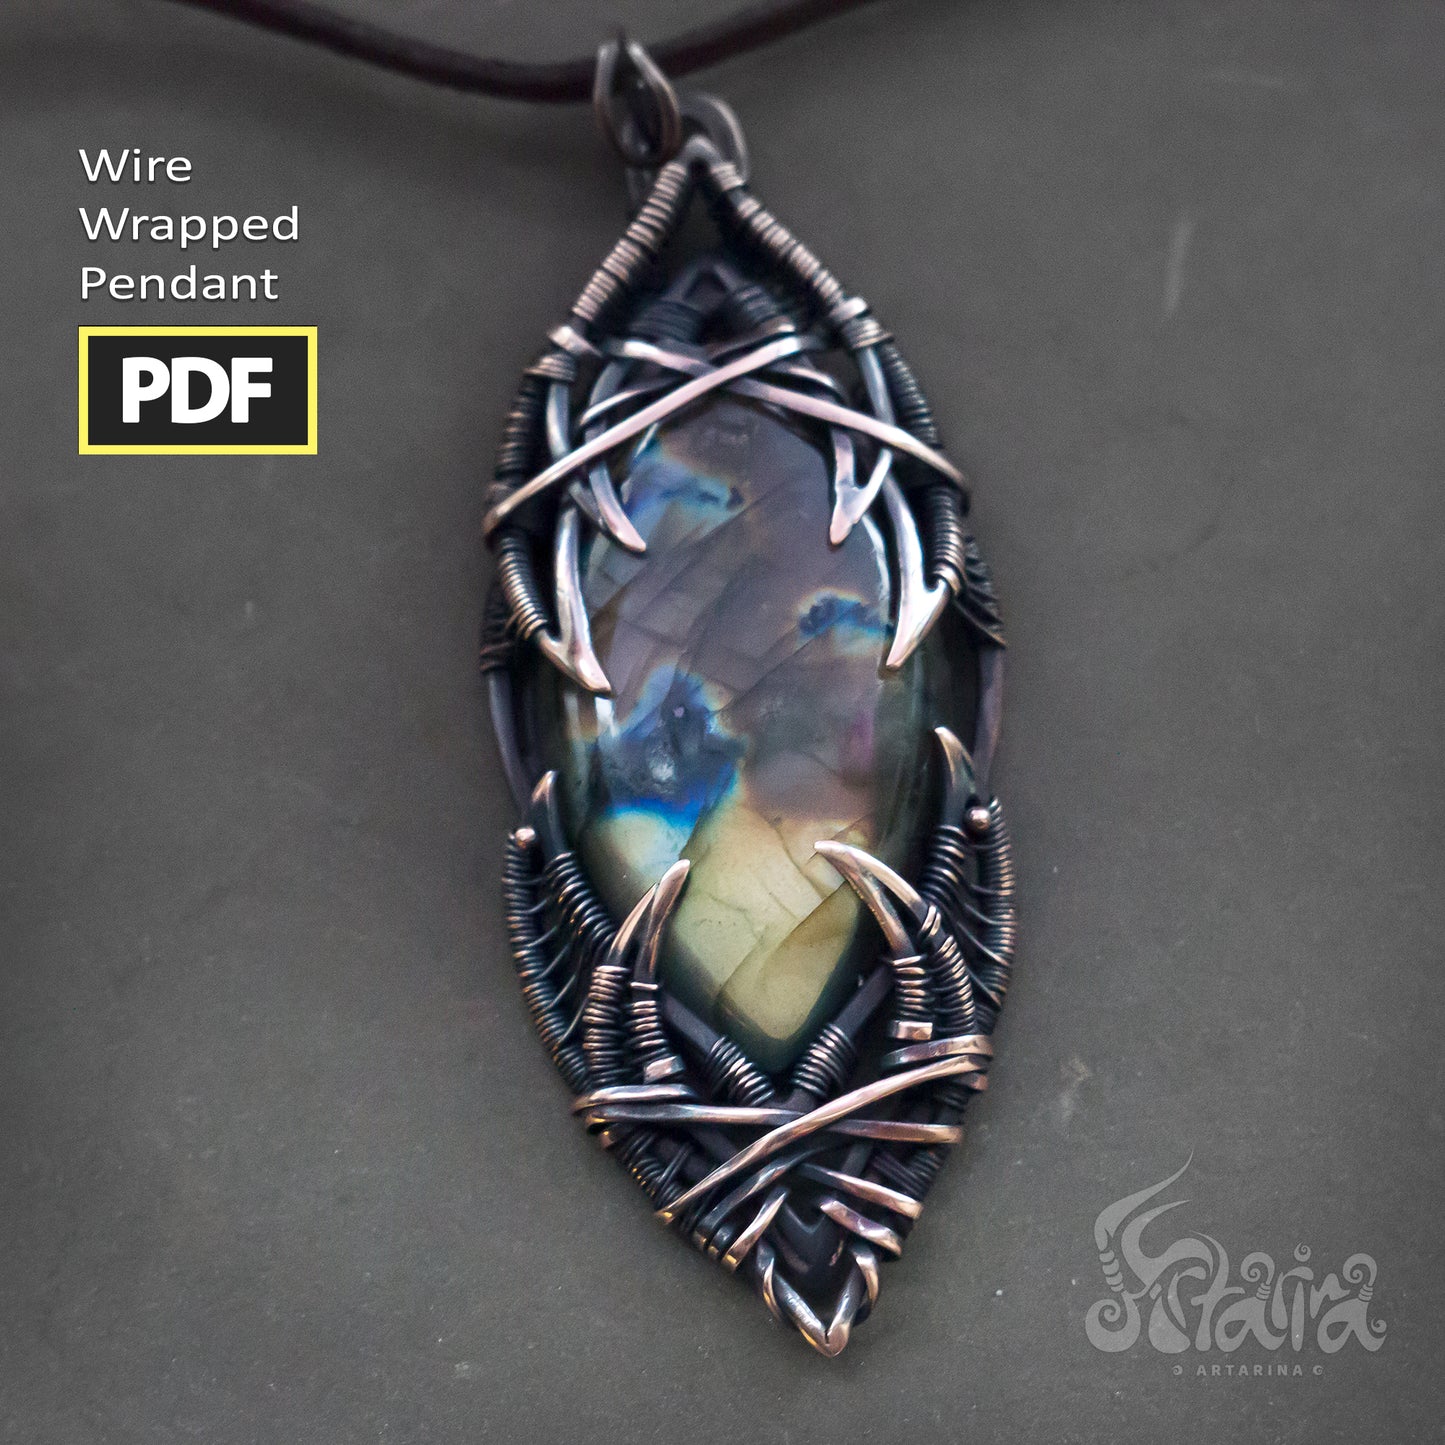 Wire wrapping PDF tutorial | Advanced diy wire jewelry | Complicated copper jewelry step by step solder and wrapping